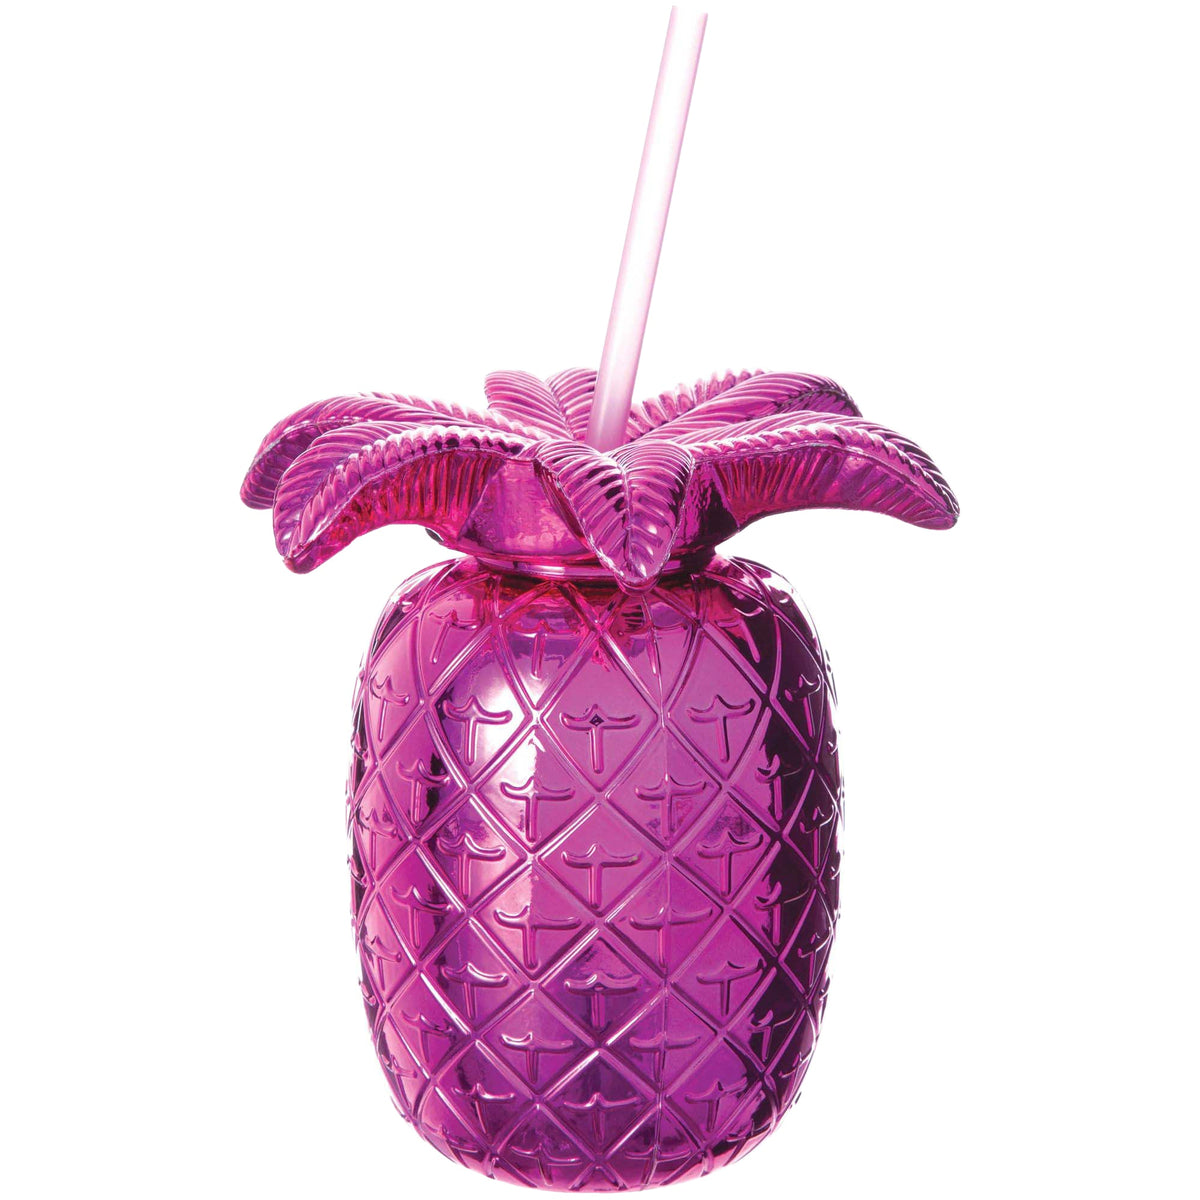 AMSCAN CA Summer Pineapple Electroplated Sippy Cup, 18 oz, 1 Count